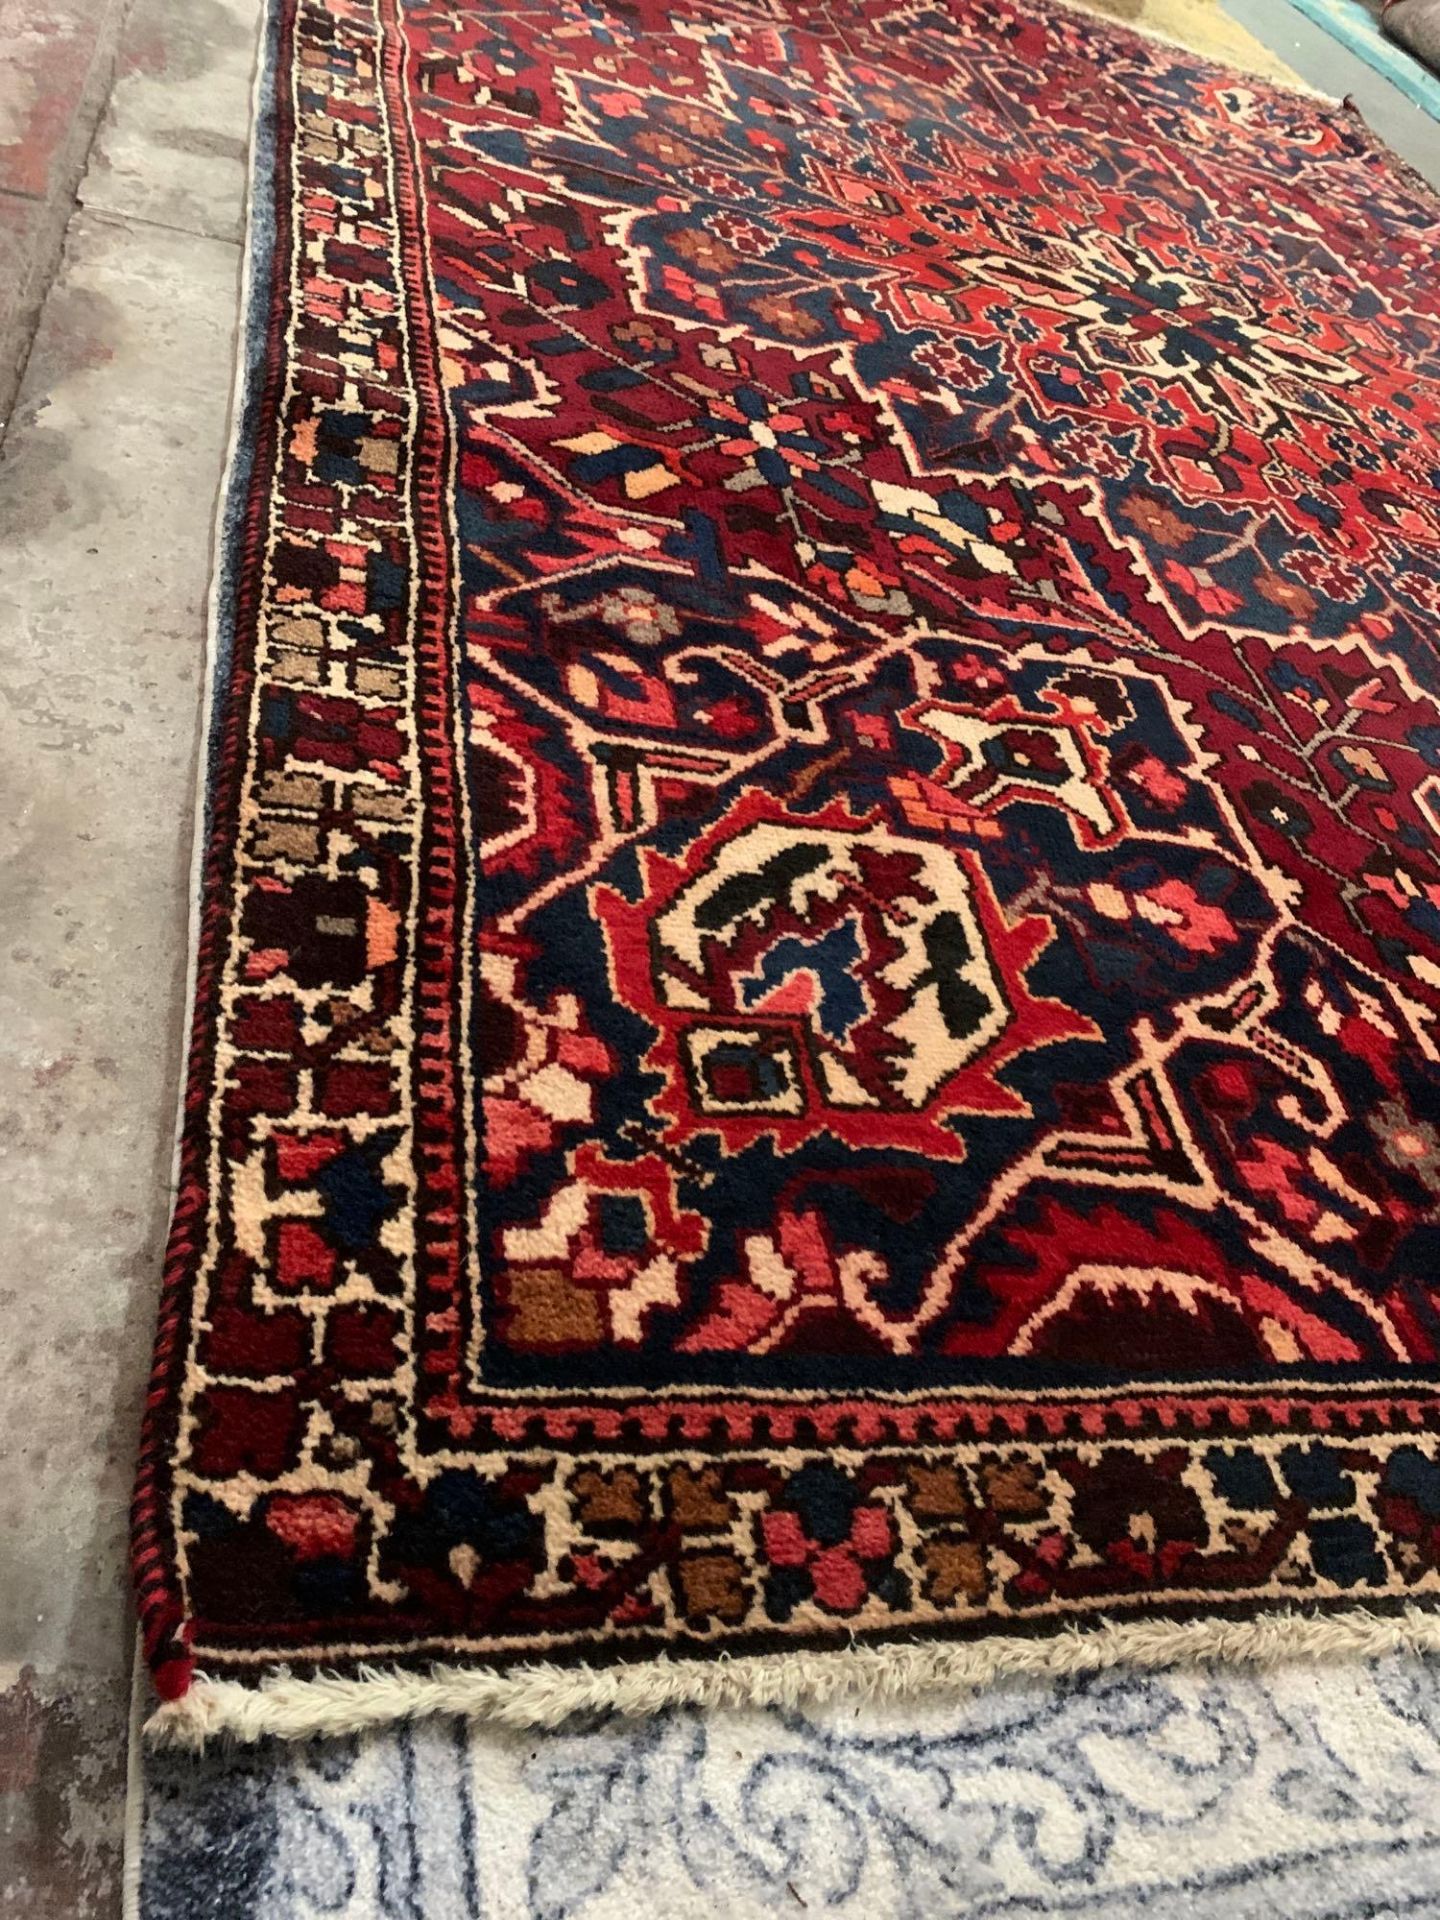 Azerbaijani Style Carpet Wool Pile Quality And High Artistic Value Hand Made Red Ground With A - Image 7 of 8